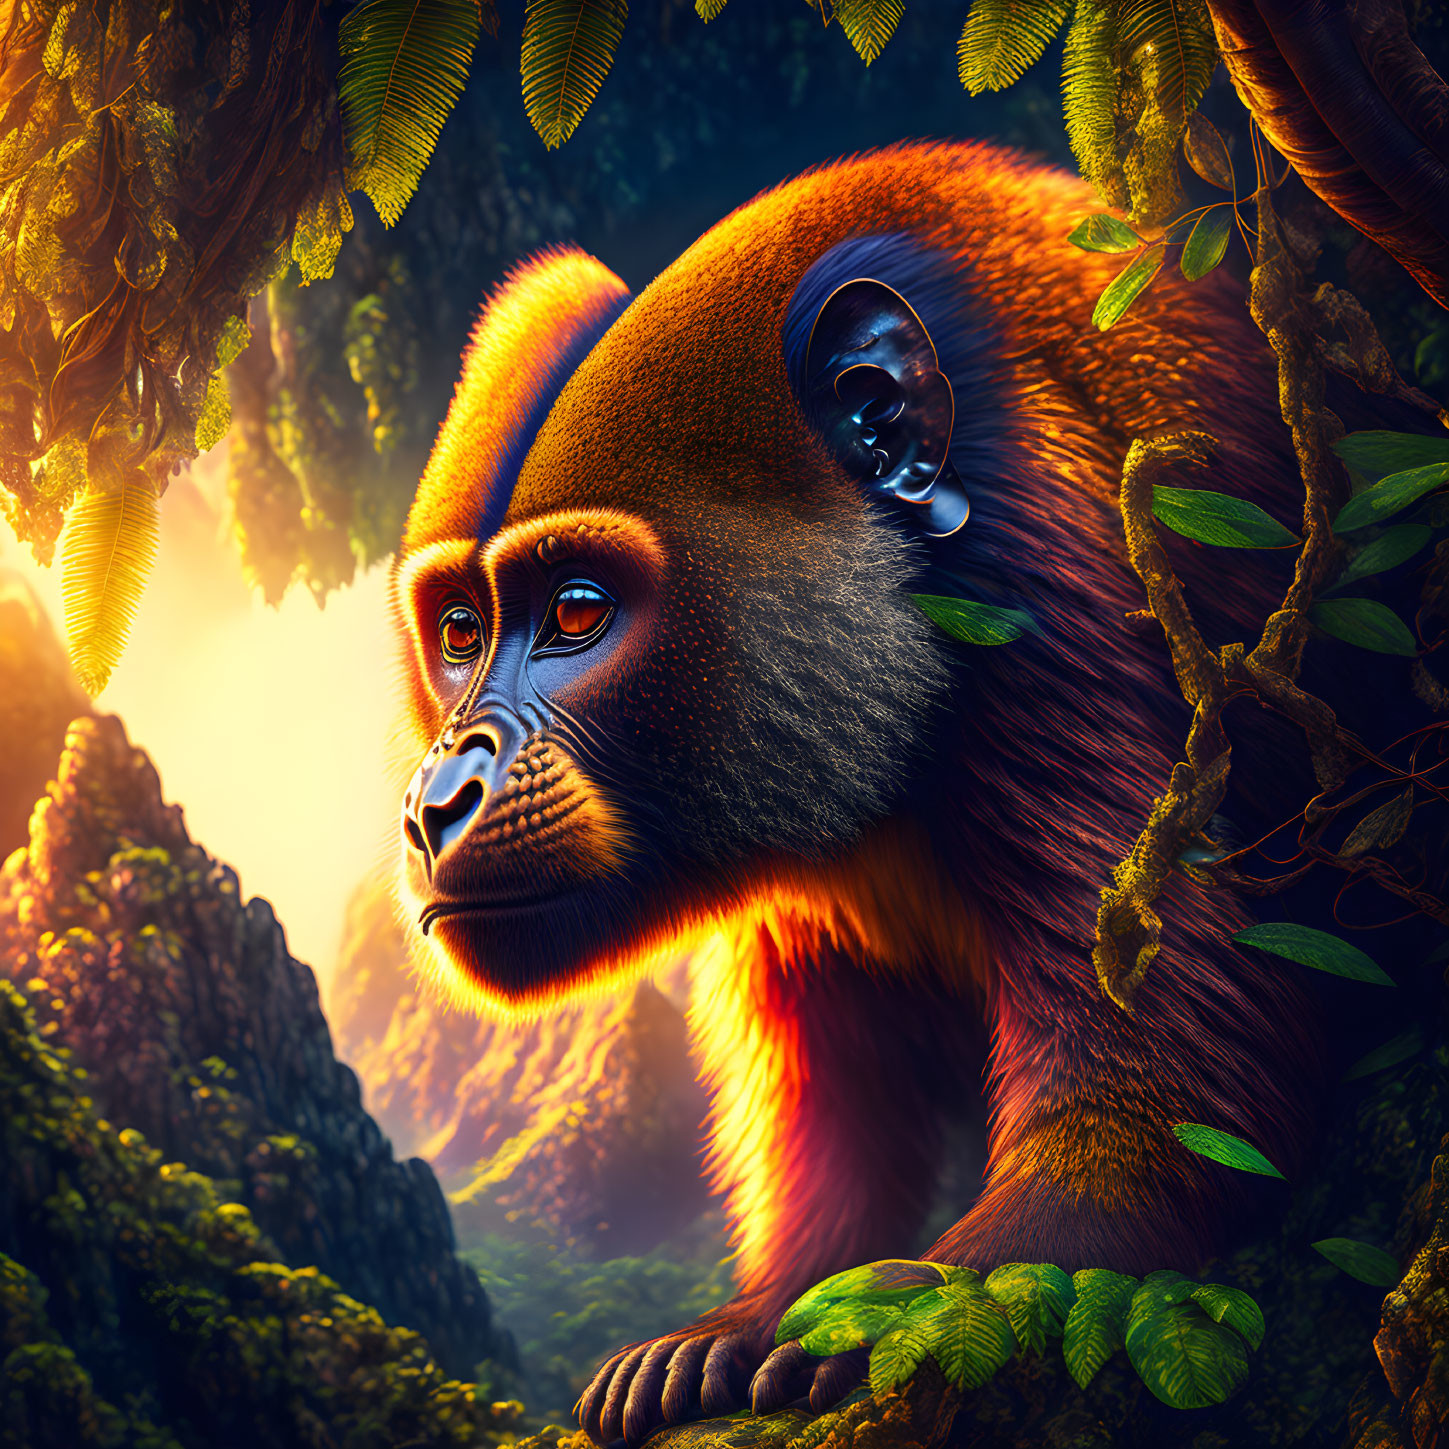 Golden monkey with reflective eyes in lush jungle at sunset